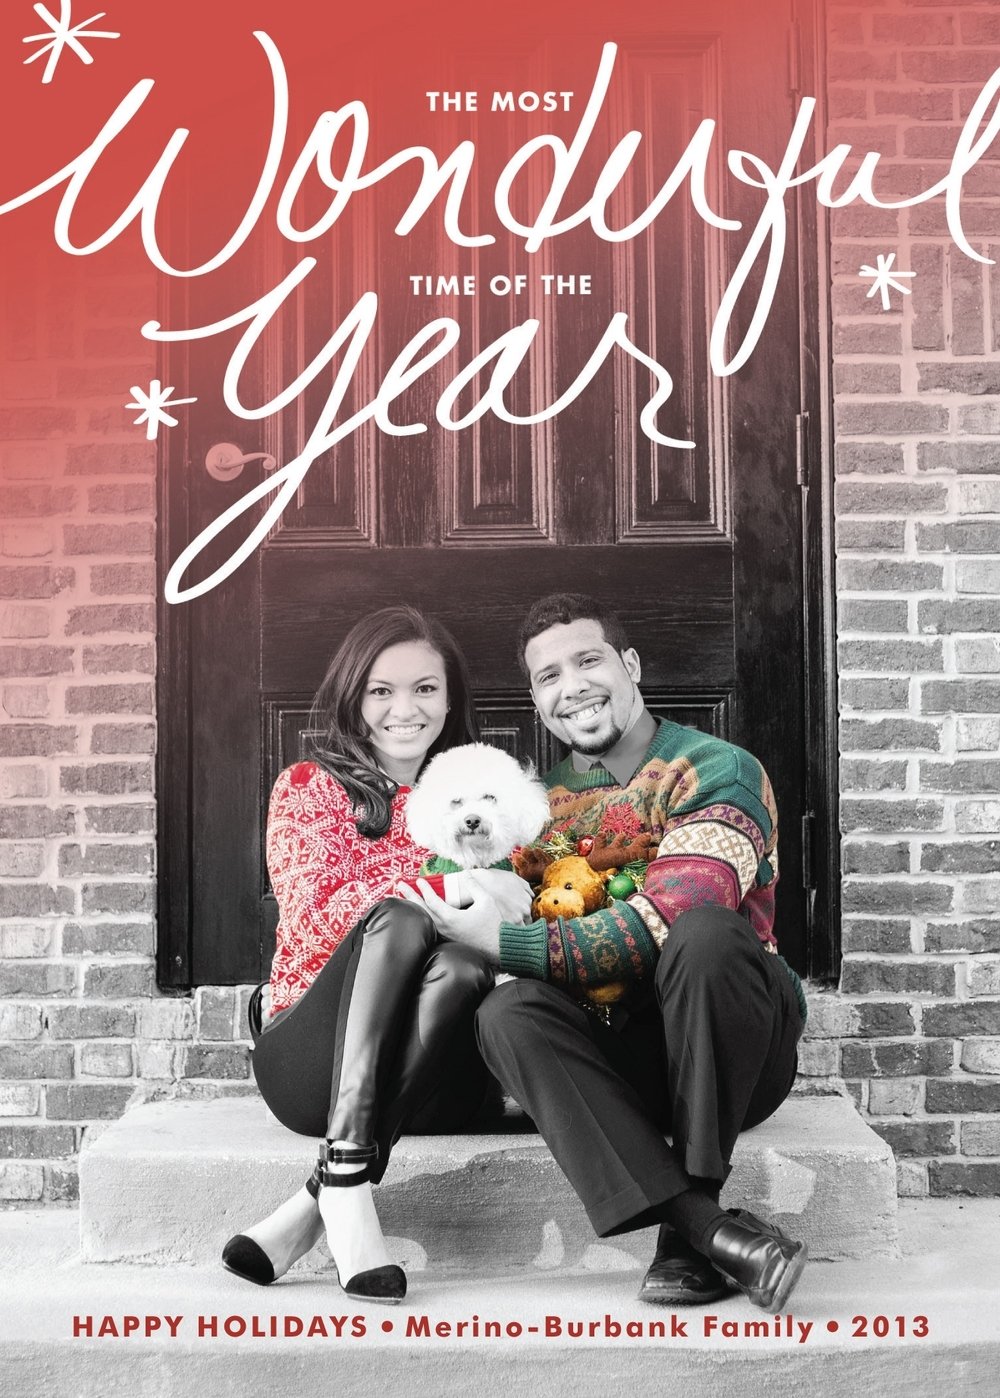 10 Spectacular Christmas Card Photo Ideas For Couples 2013 family holiday card caroline in the city 2022